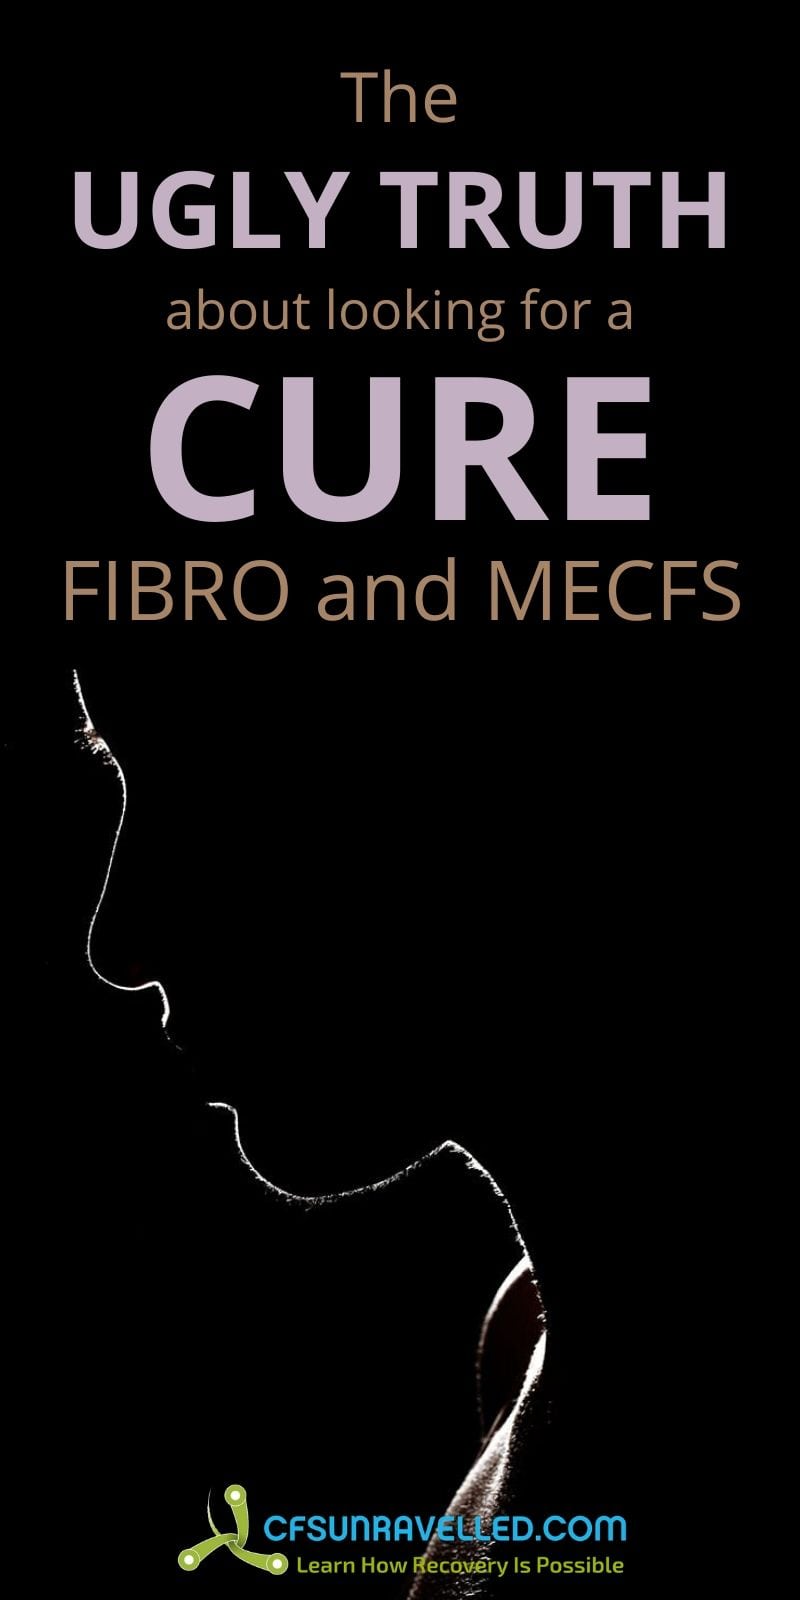 Persons unseen face with the ugly truth about looking for a cure with Fibromyalgia and MECFS